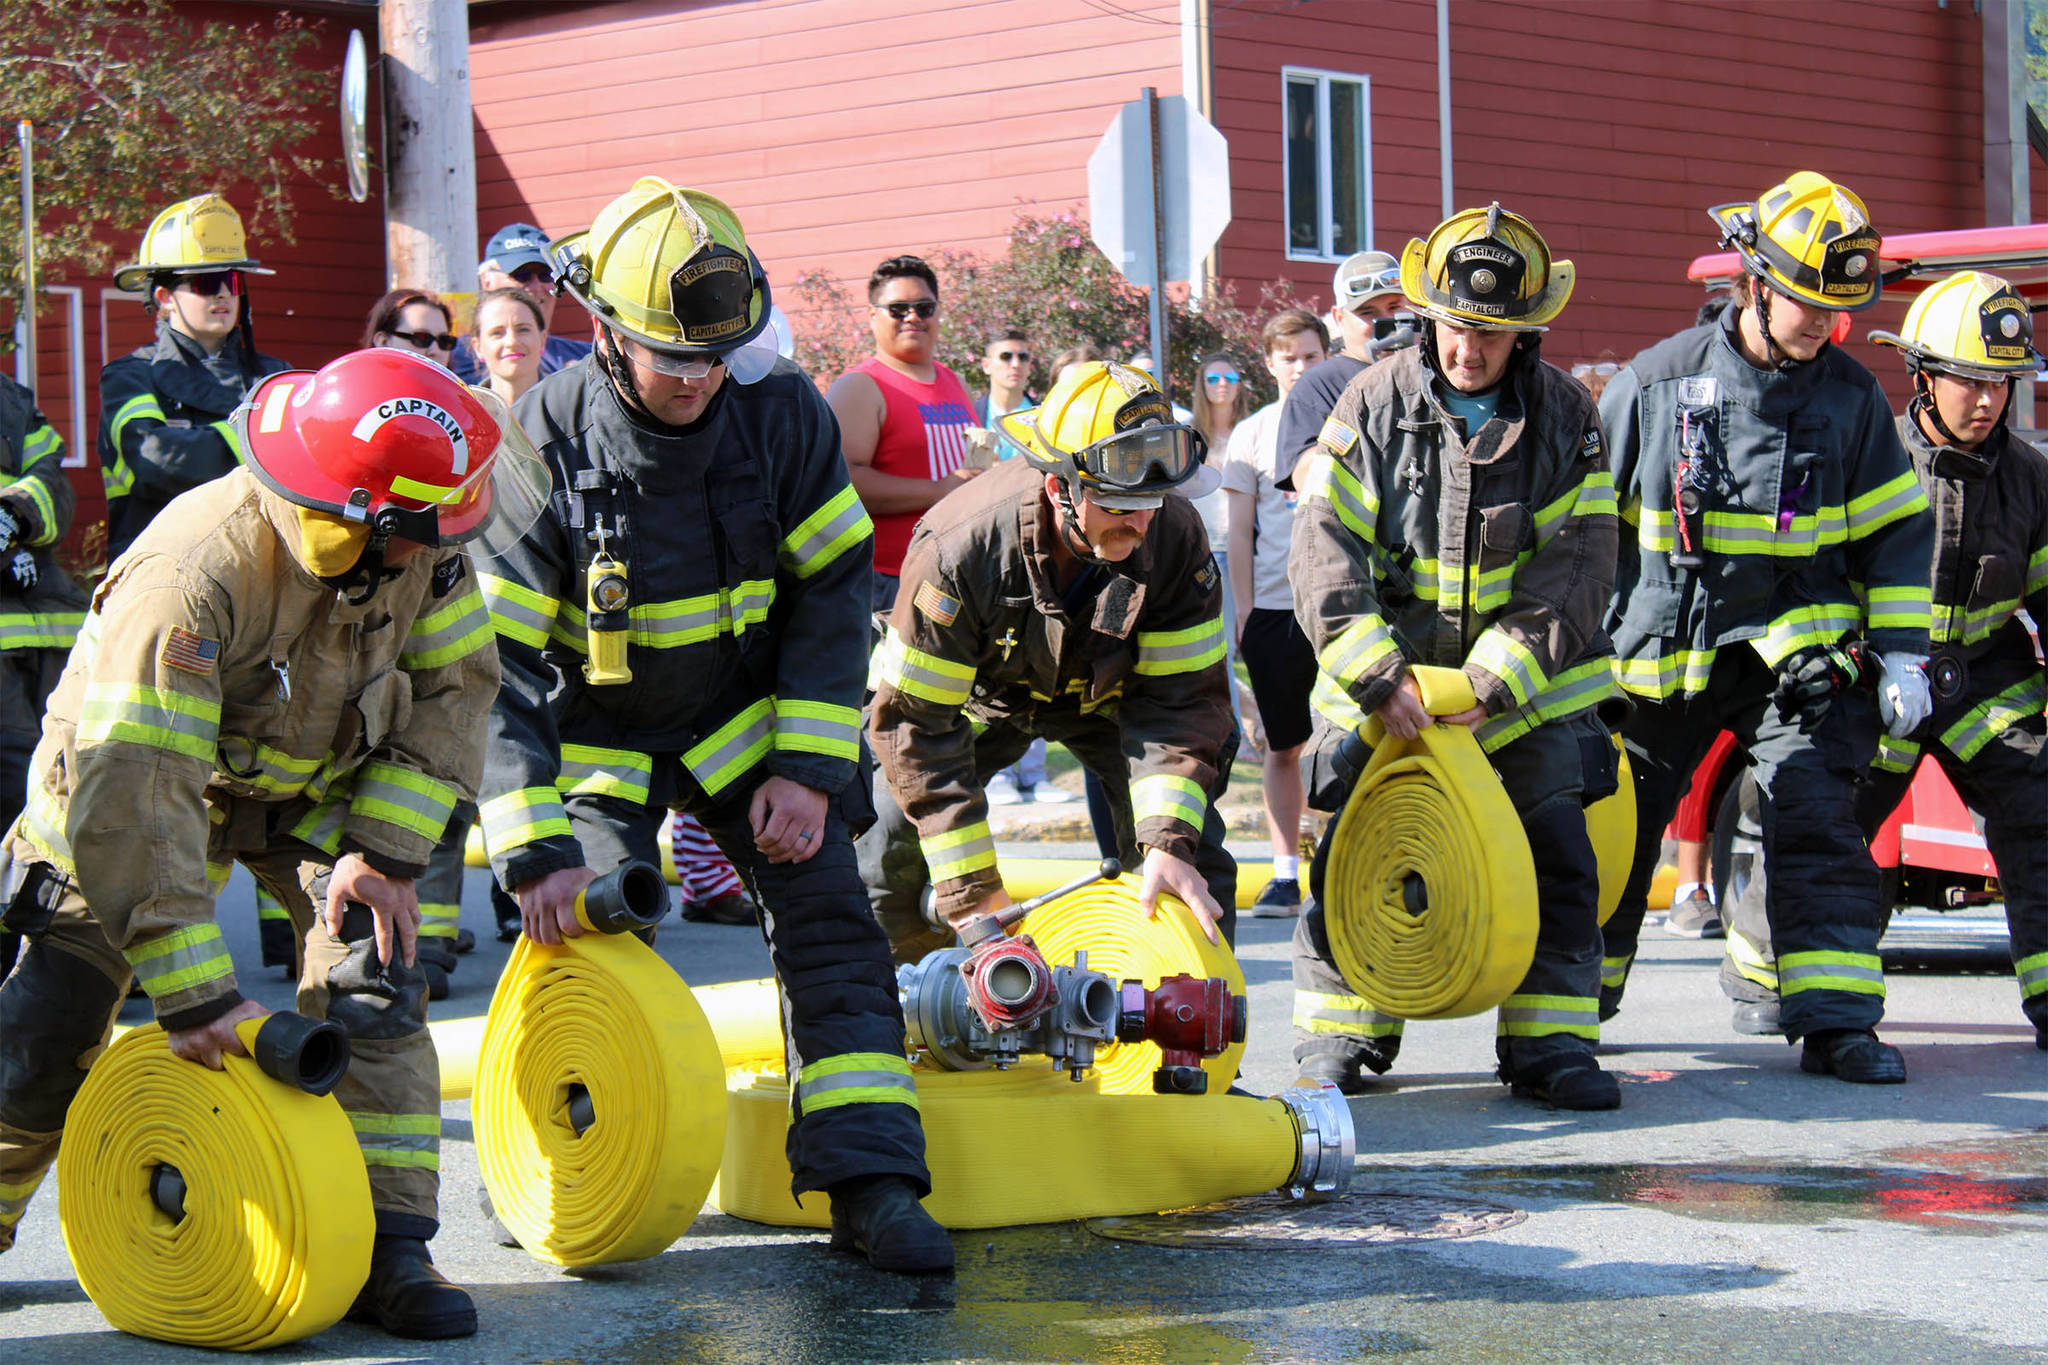 Members of Capital City Fire and Rescue competed in the “Olde Time Fireman’s Hose Race” as hundreds cheered the different crews in their efforts to quickly unroll and connect the hose to water in front of the Volunteer Fire House. (Dana Zigmund/Juneau Empire)